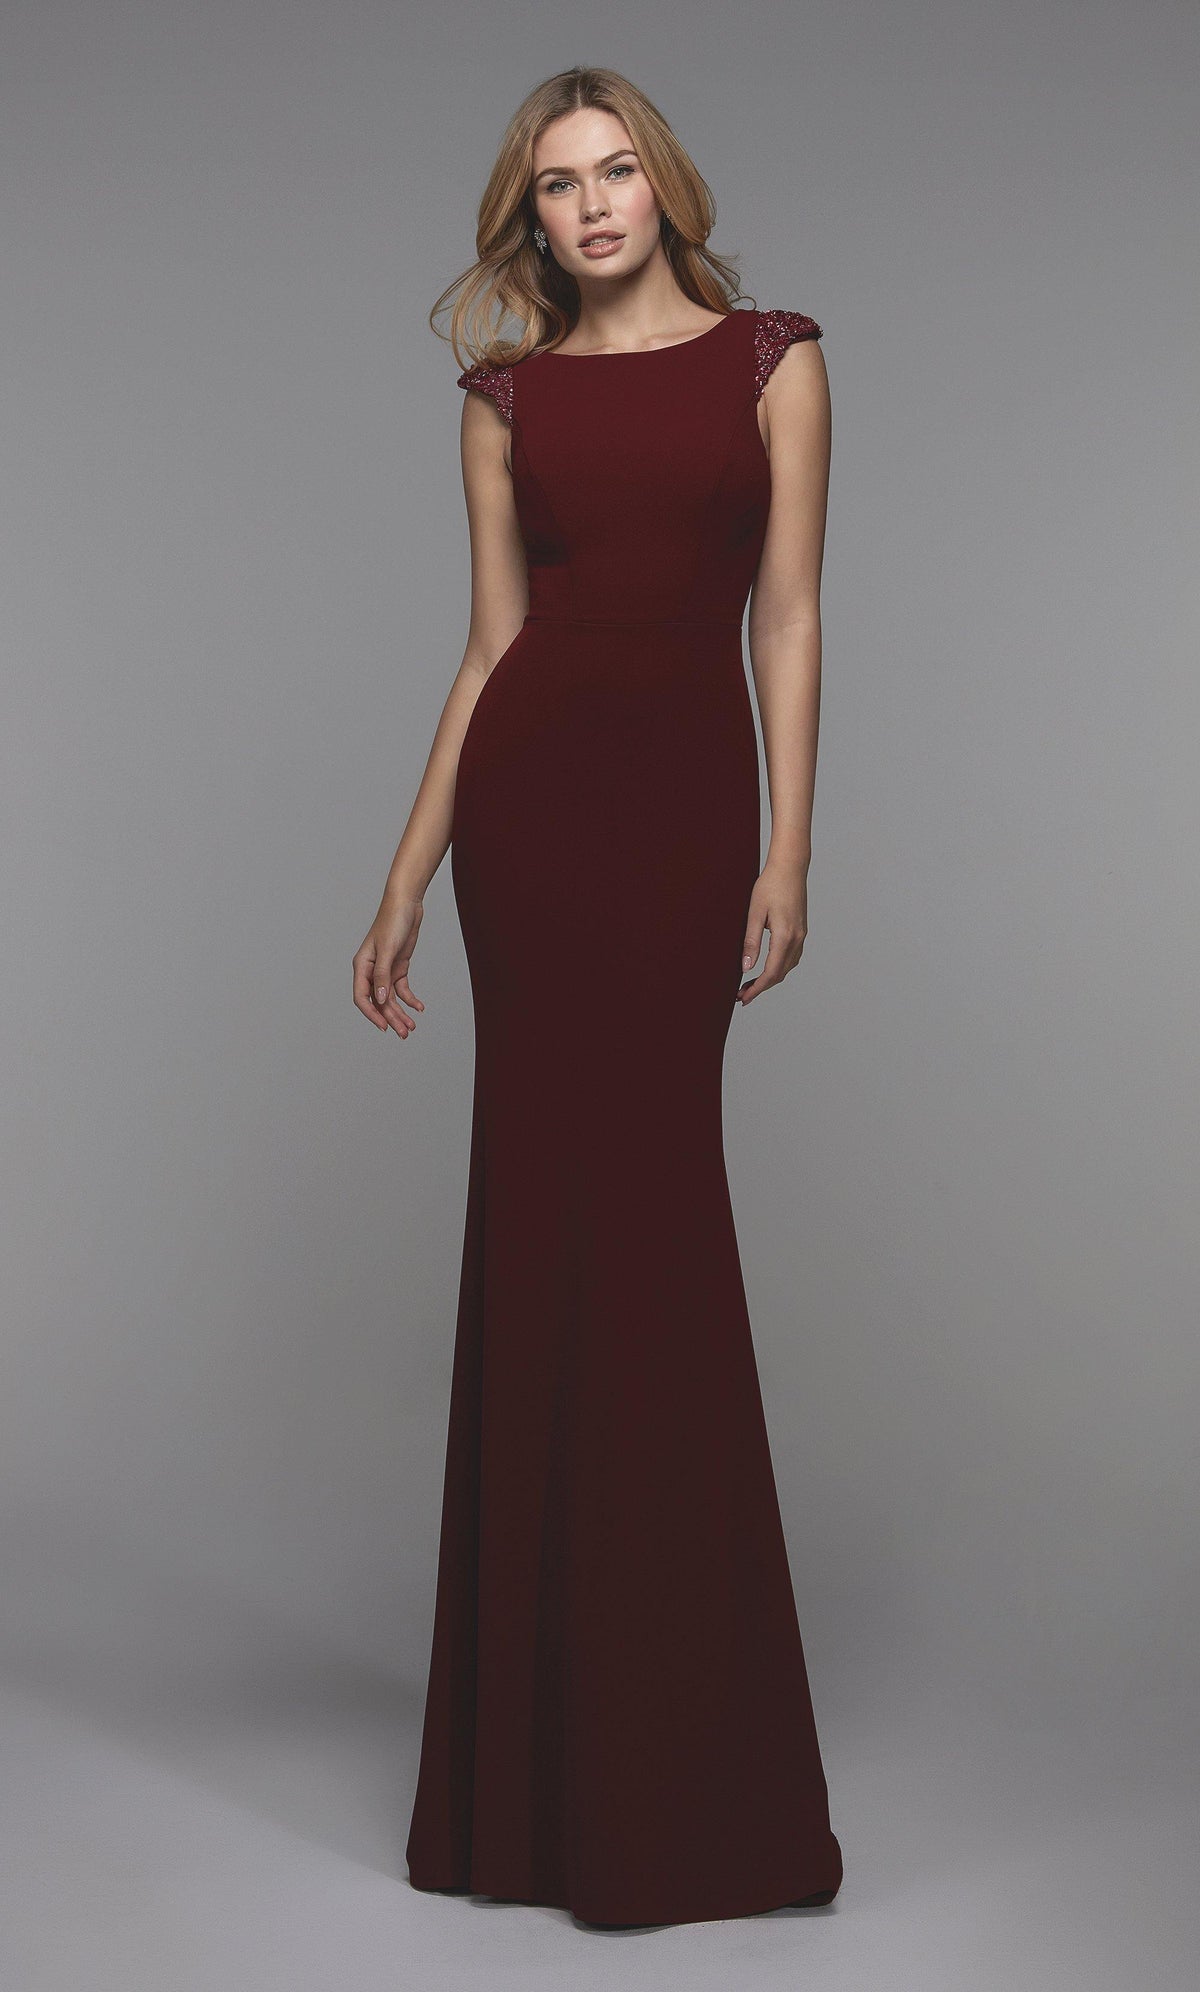 Burgundy high scoop neck long evening dress with beaded capped sleeves